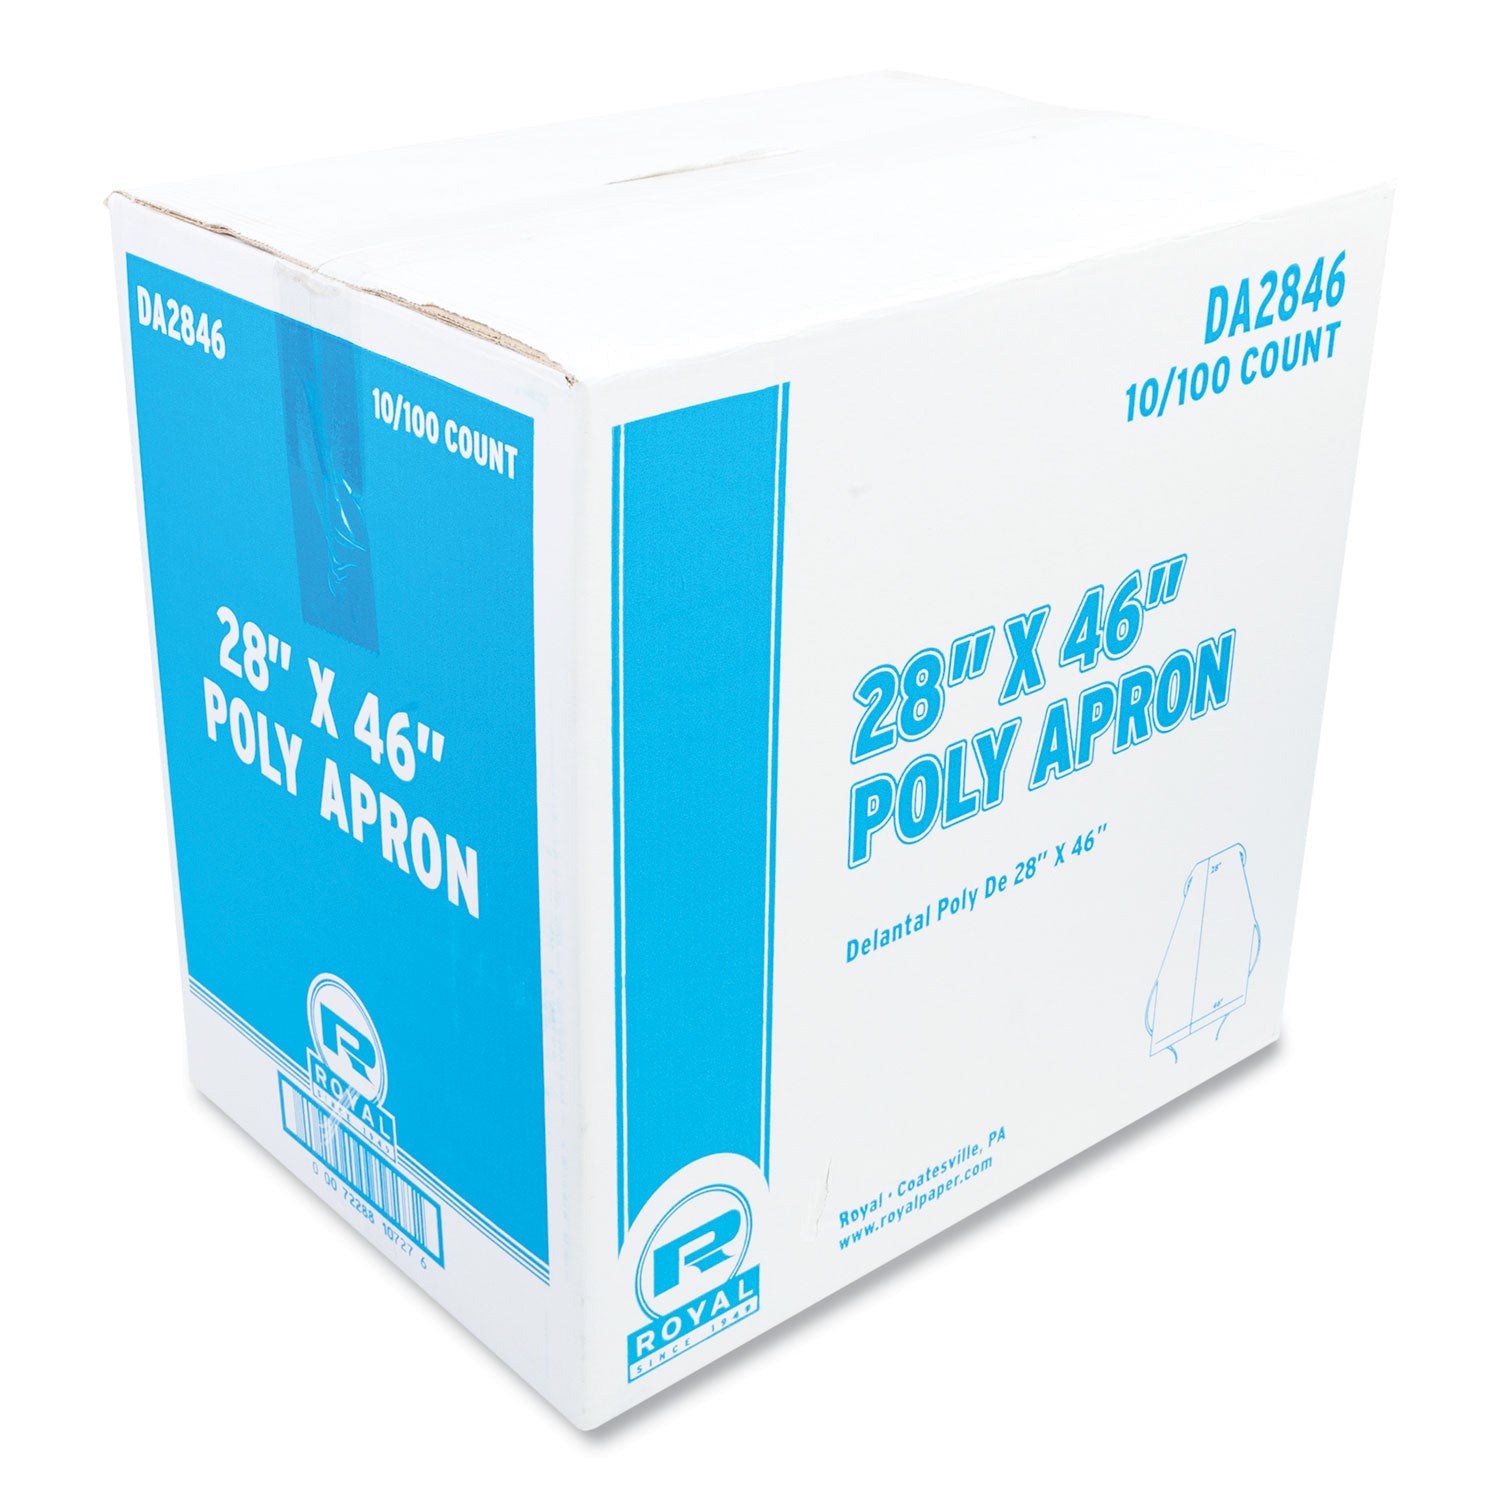 poly-apron-28-x-46-one-size-fits-all-white-100-pack-10-packs-carton_rppda2846 - 1